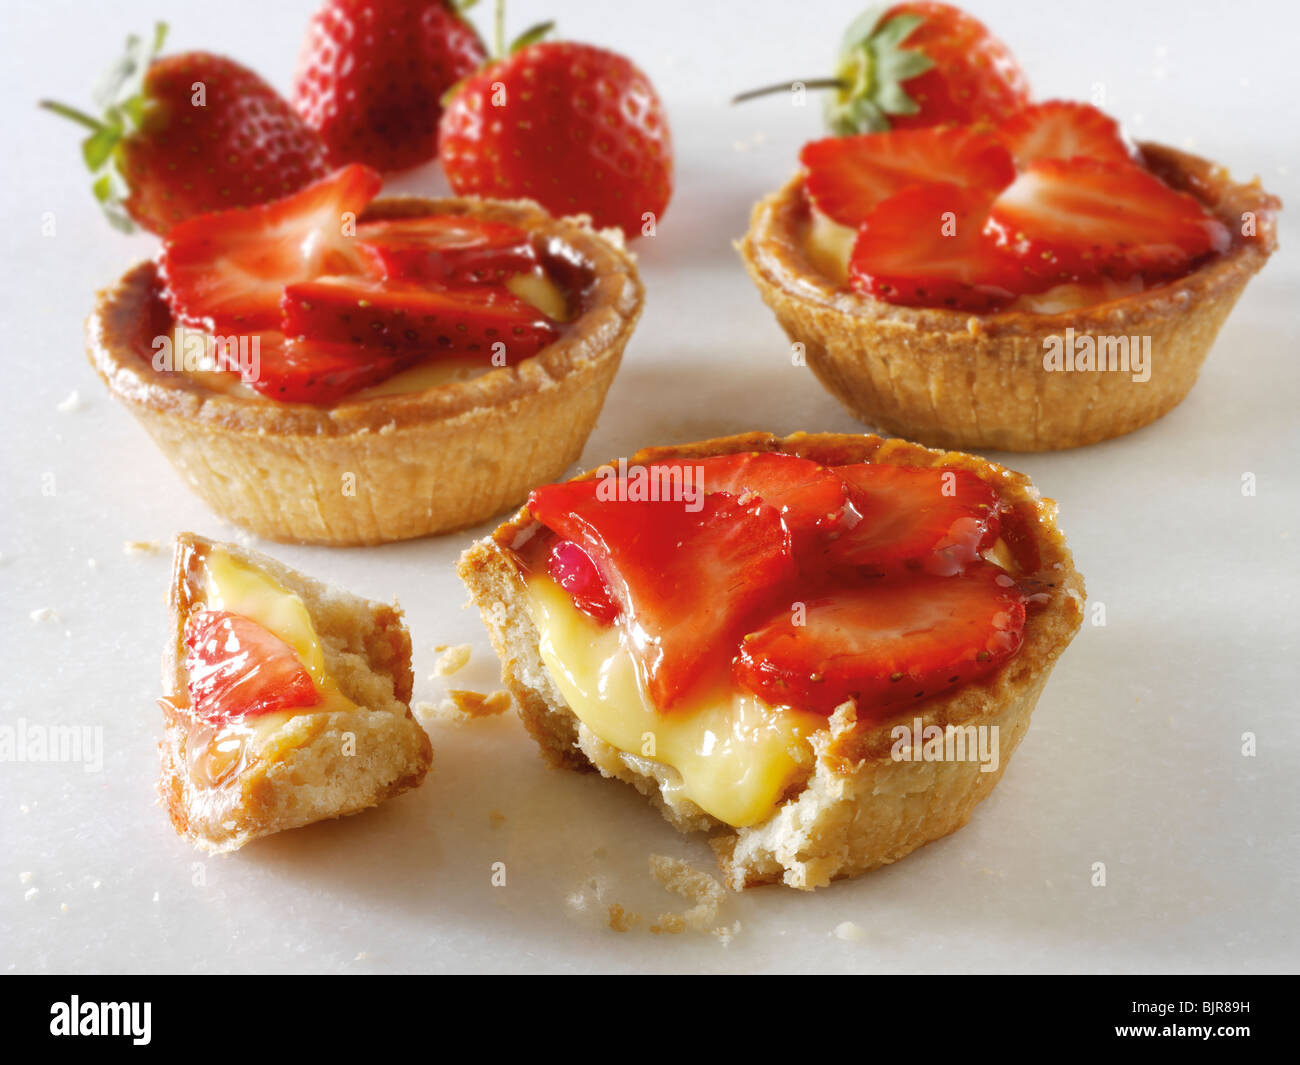 Fresh cooked traditional British strawberry and custard pastry tarts on a white background. Stock Photo